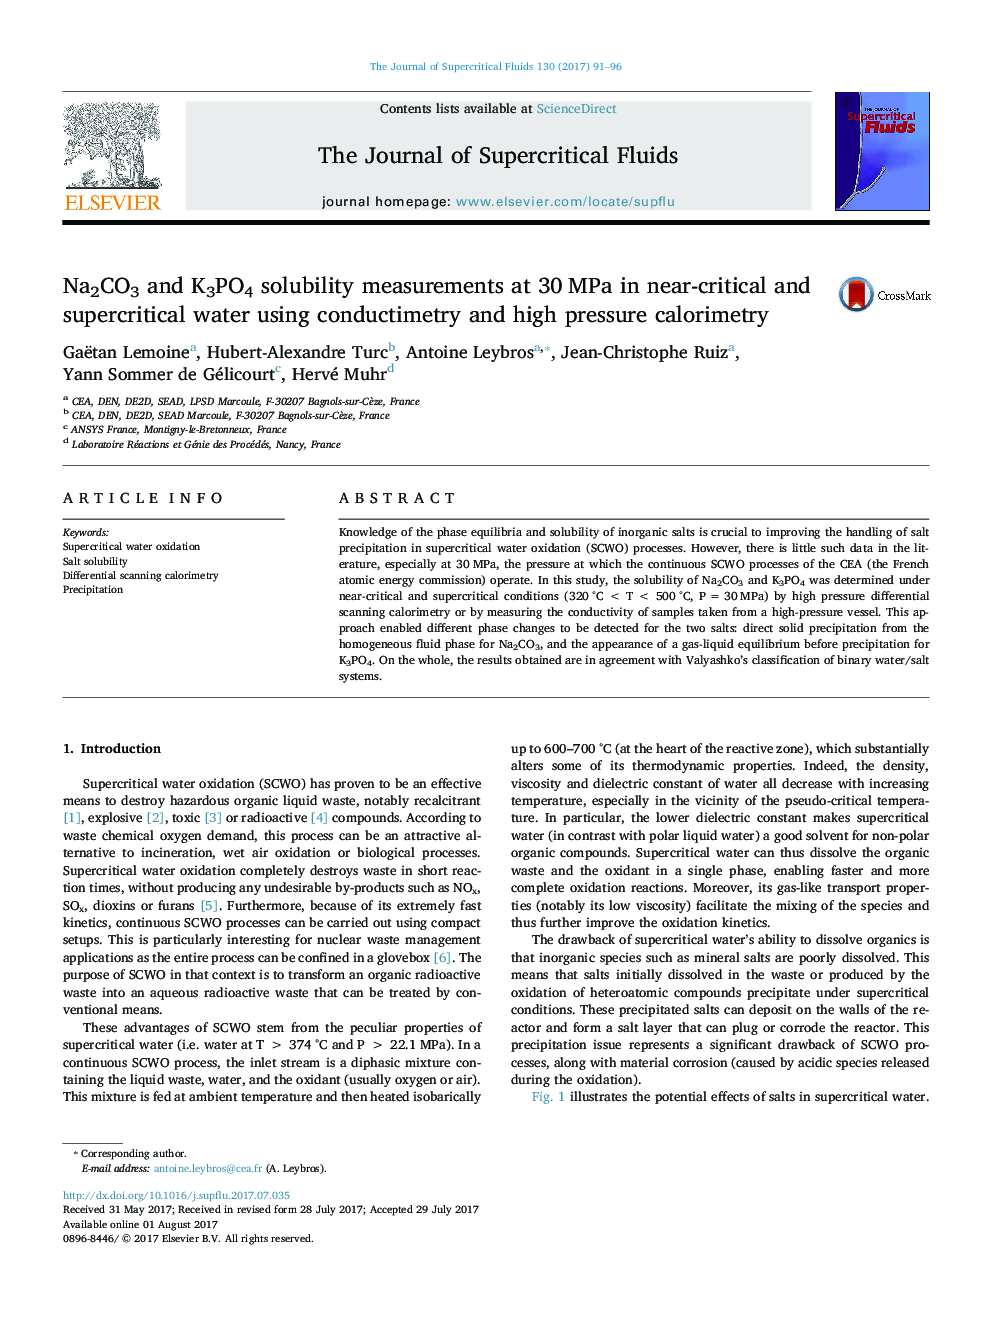 Na2CO3 and K3PO4 solubility measurements at 30 MPa in near-critical and supercritical water using conductimetry and high pressure calorimetry